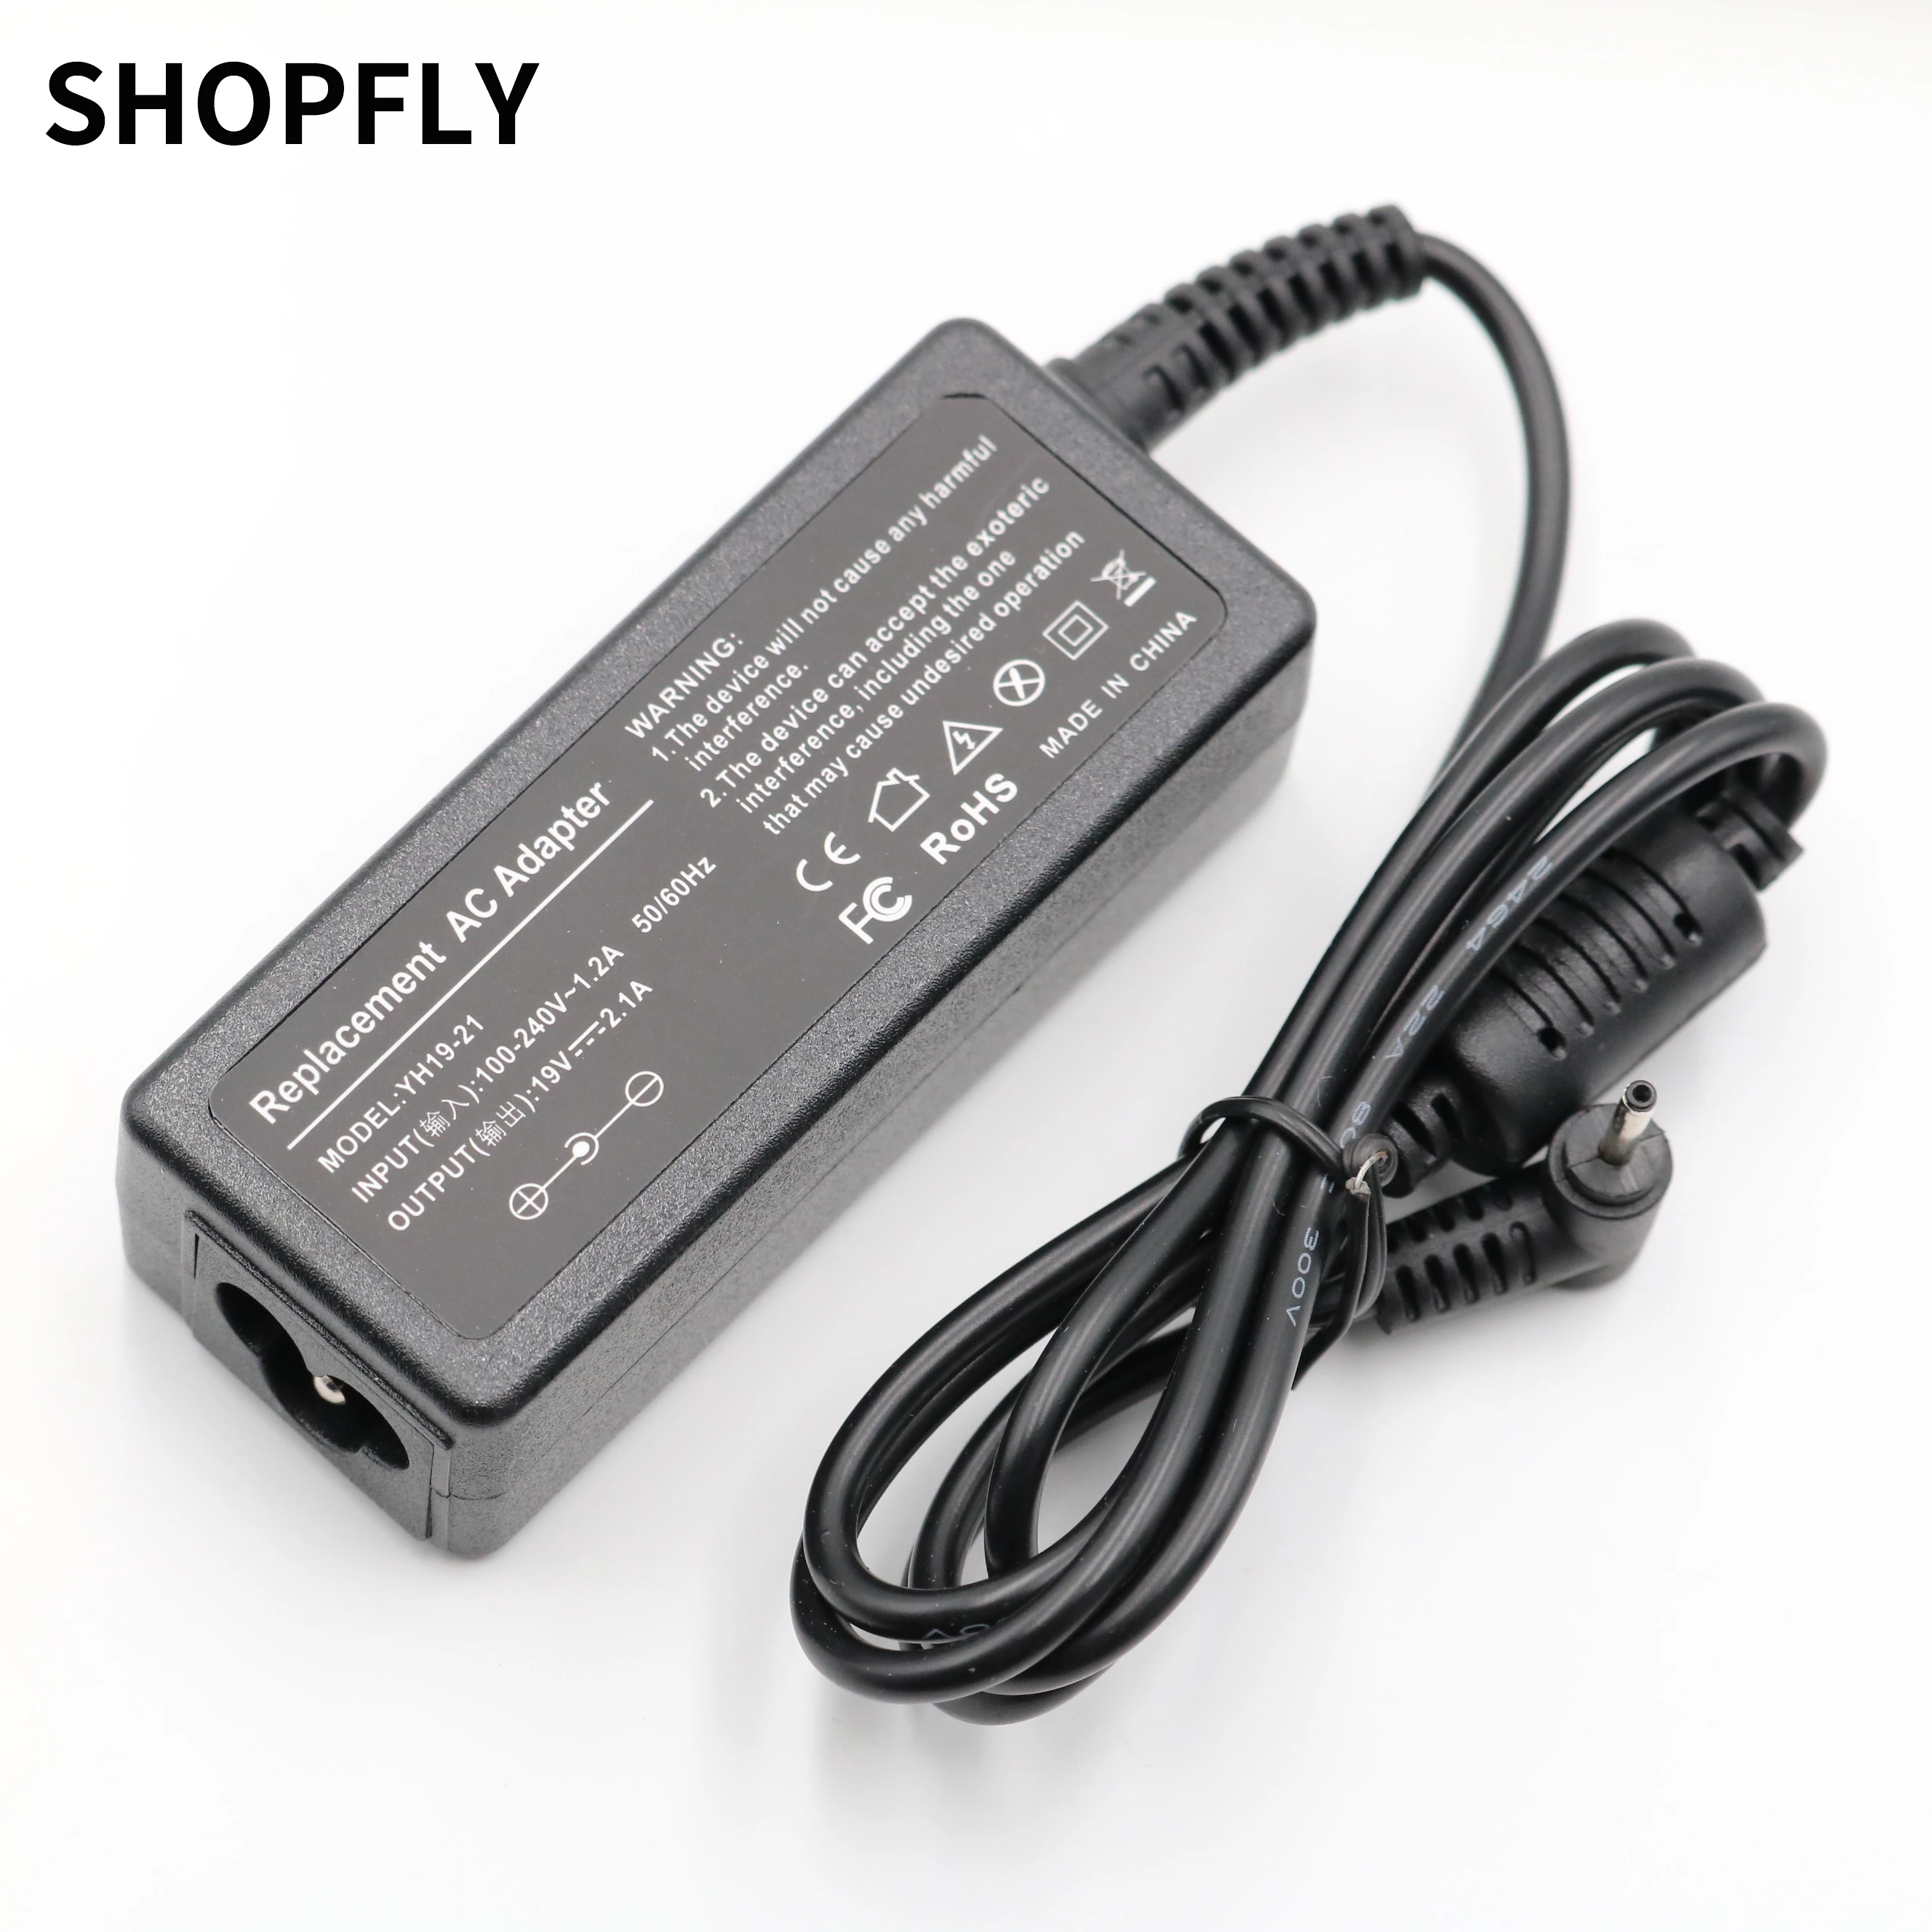 19v 2 1a Ac Adapter Charger Power Supply For Asus Eee Pc 1001ha 1001p 1001px 1005ha 1016 1016p 1215pw 1215n 1005 1011px 1005hab Laptop Adapter Aliexpress